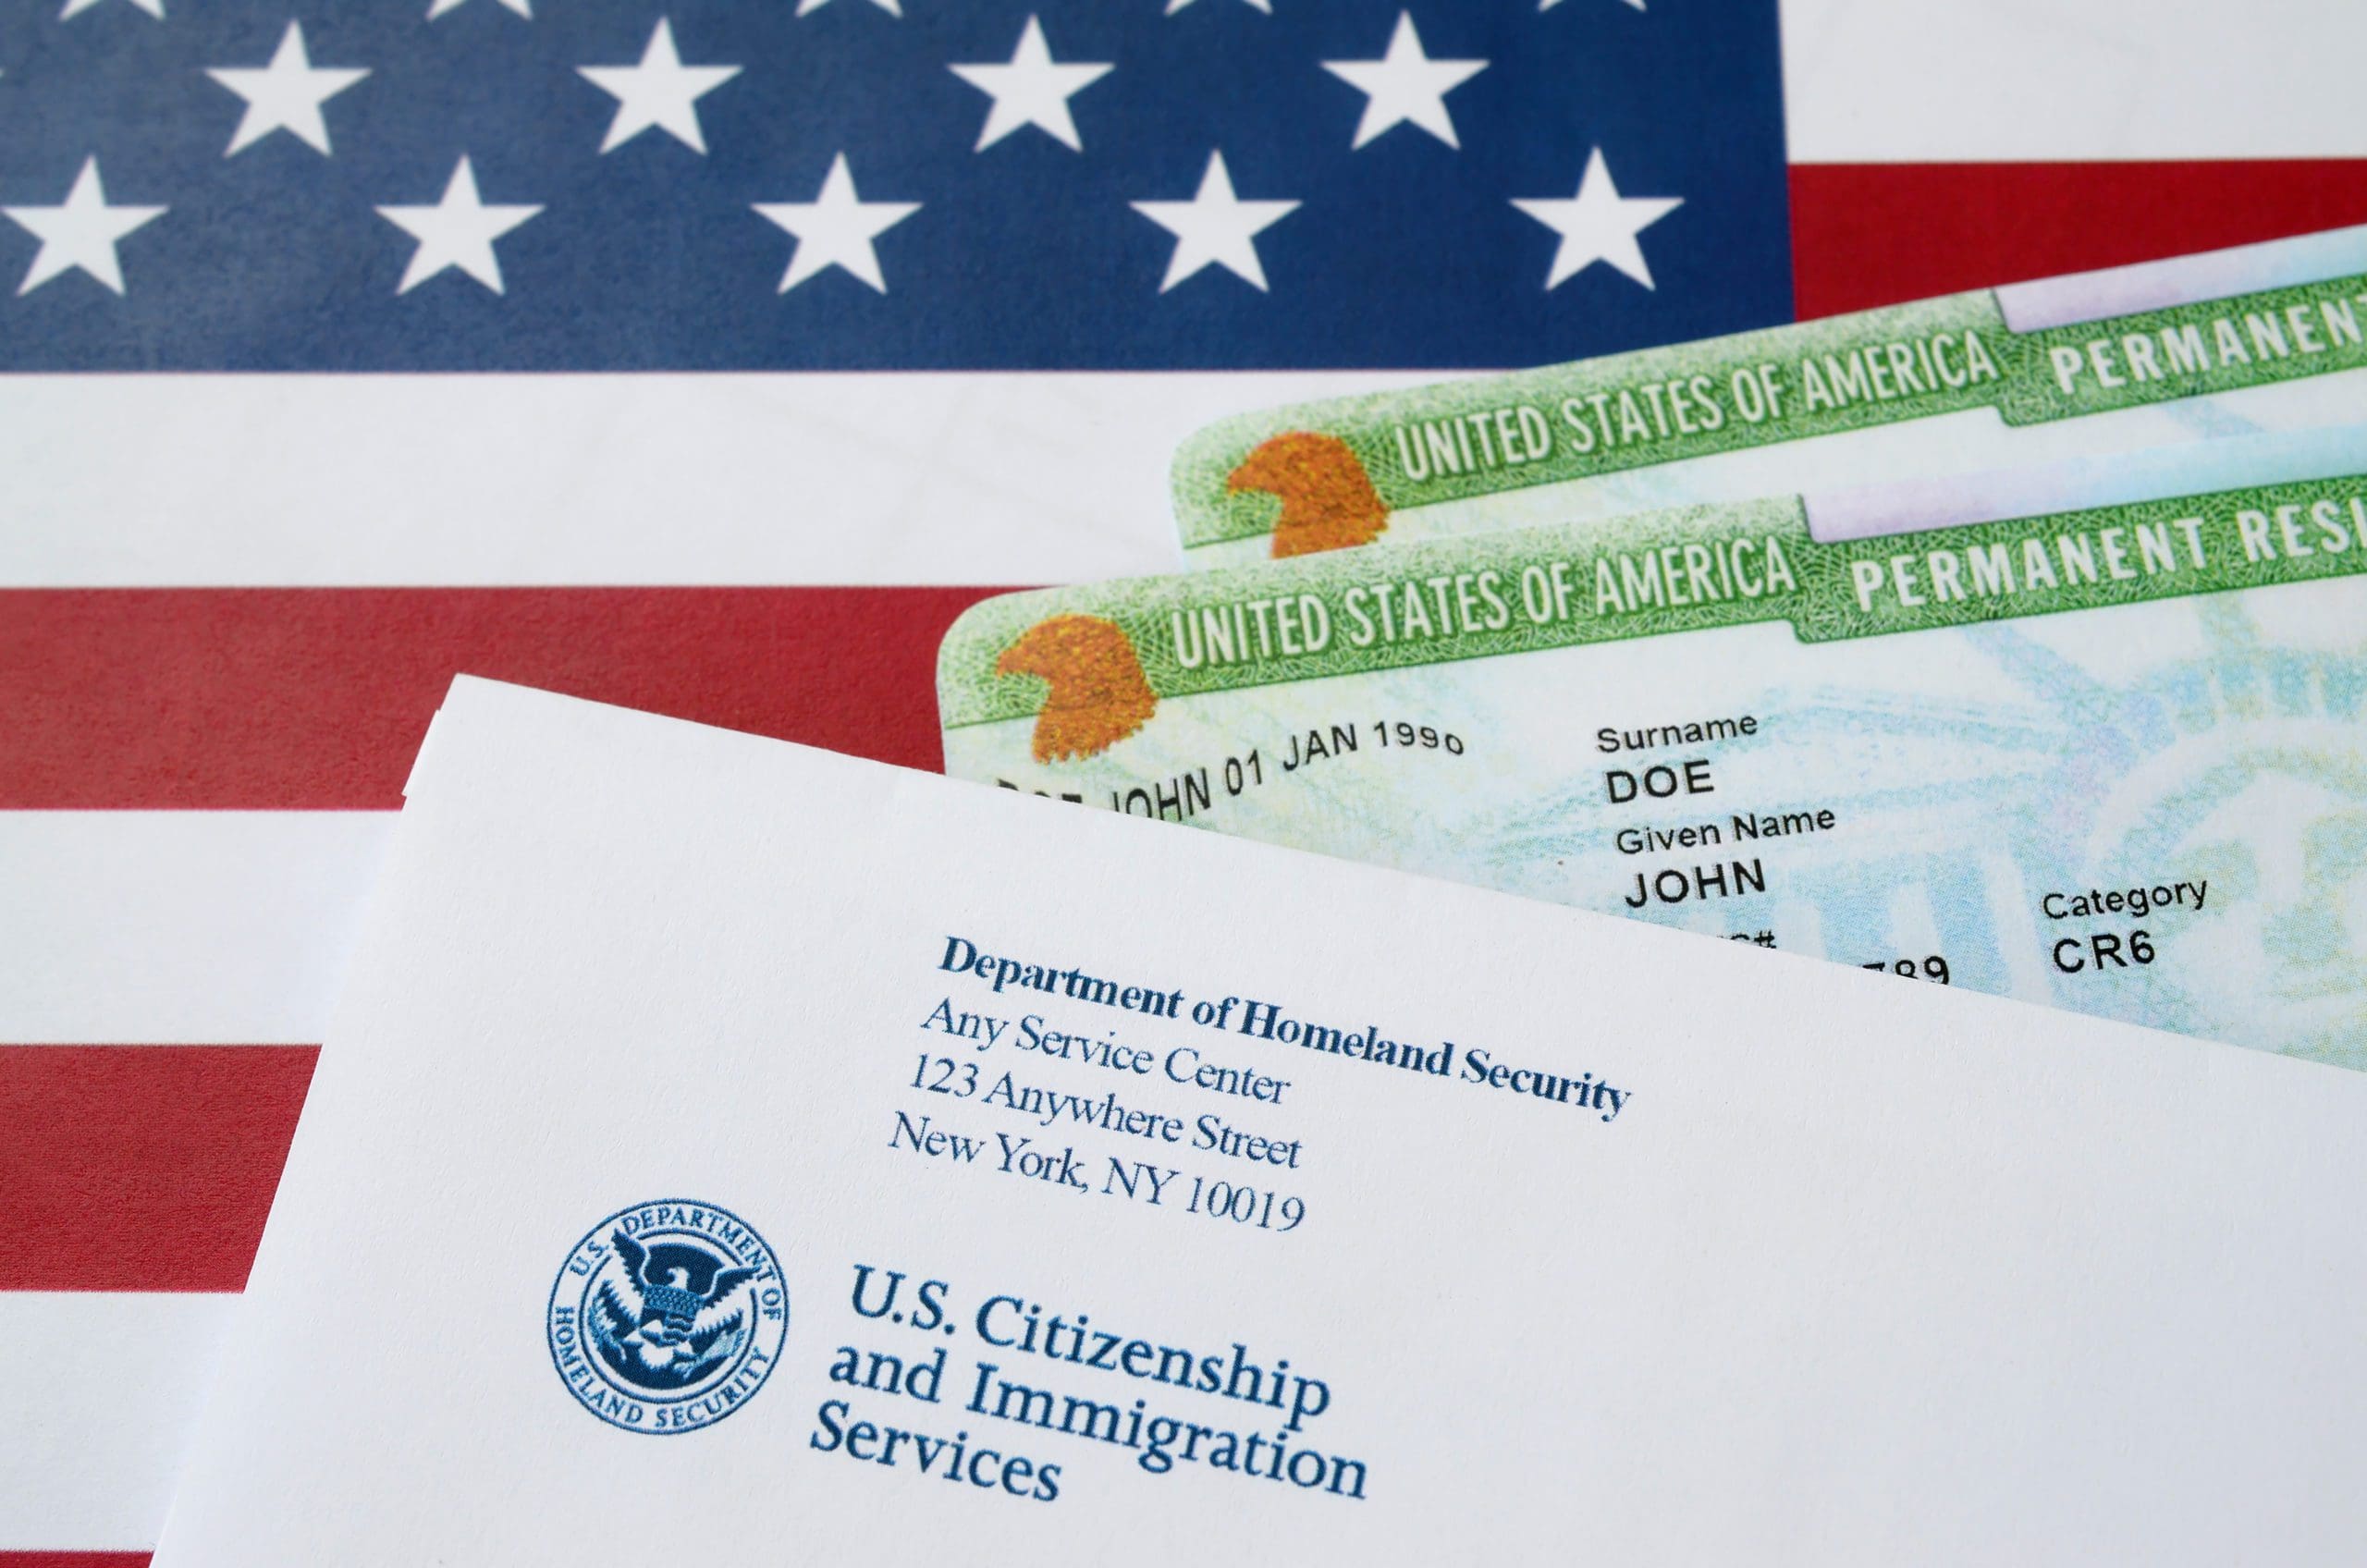 https://onlinevisas.com/wp-content/uploads/2022/09/United-States-Permanent-resident-green-cards-from-dv-lottery-lies-on-United-States-flag-with-envelope-from-Department-of-Homeland-Security-scaled.jpeg